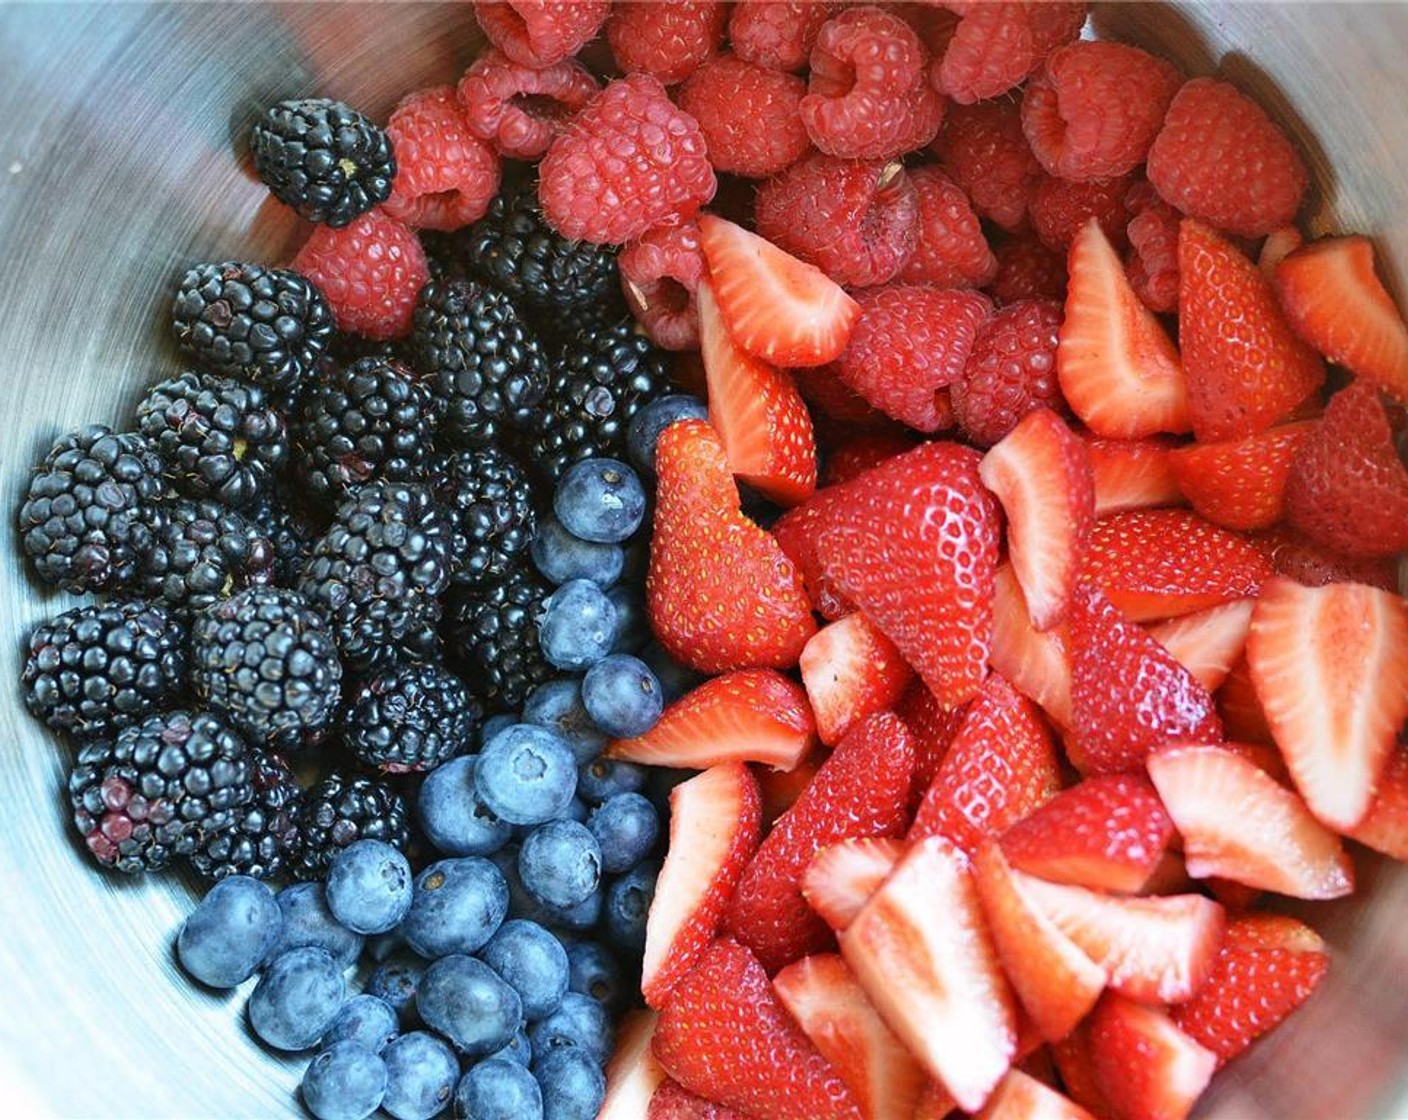 step 6 In a large mixing bowl, carefully toss together Fresh Blackberry (1 cup), Fresh Blueberry (1 cup), Fresh Raspberries (1 1/3 cups), Fresh Strawberries (2 cups), with Granulated Sugar (3 Tbsp), All-Purpose Flour (1/4 cup), and Lemon (1).